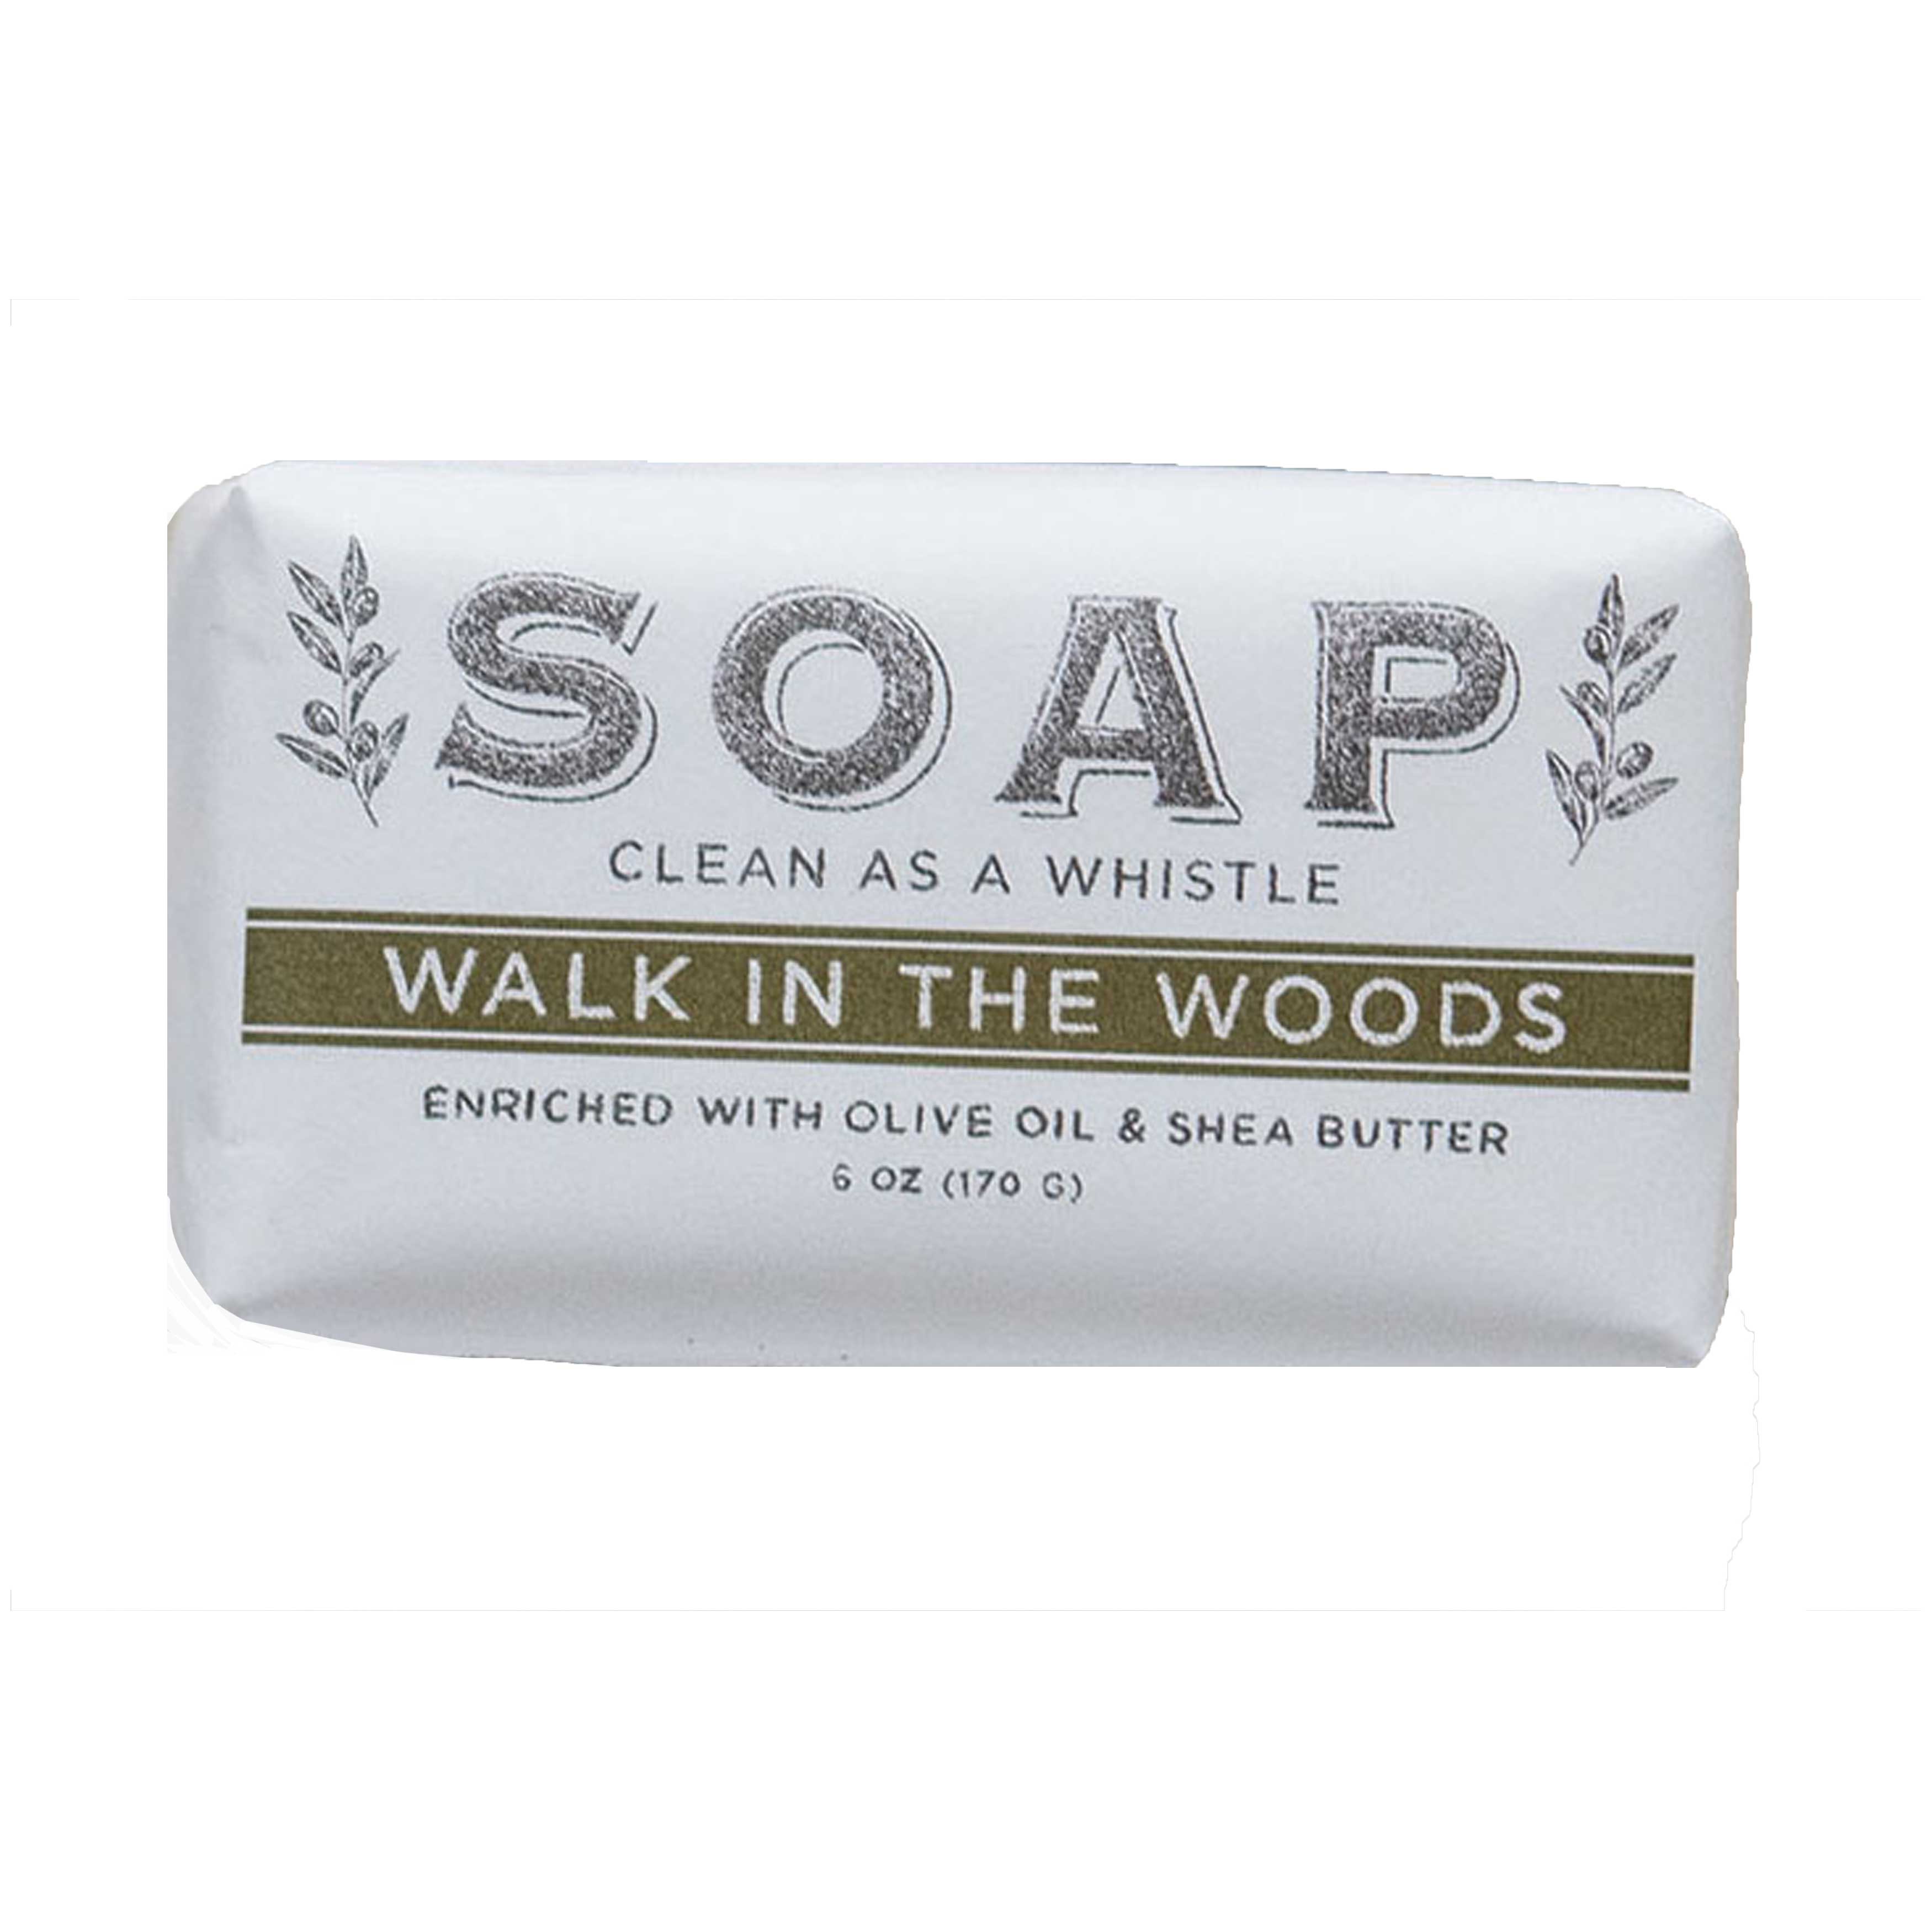 Olive Oil & Shea Butter Milled Soap - Walk in the Woods